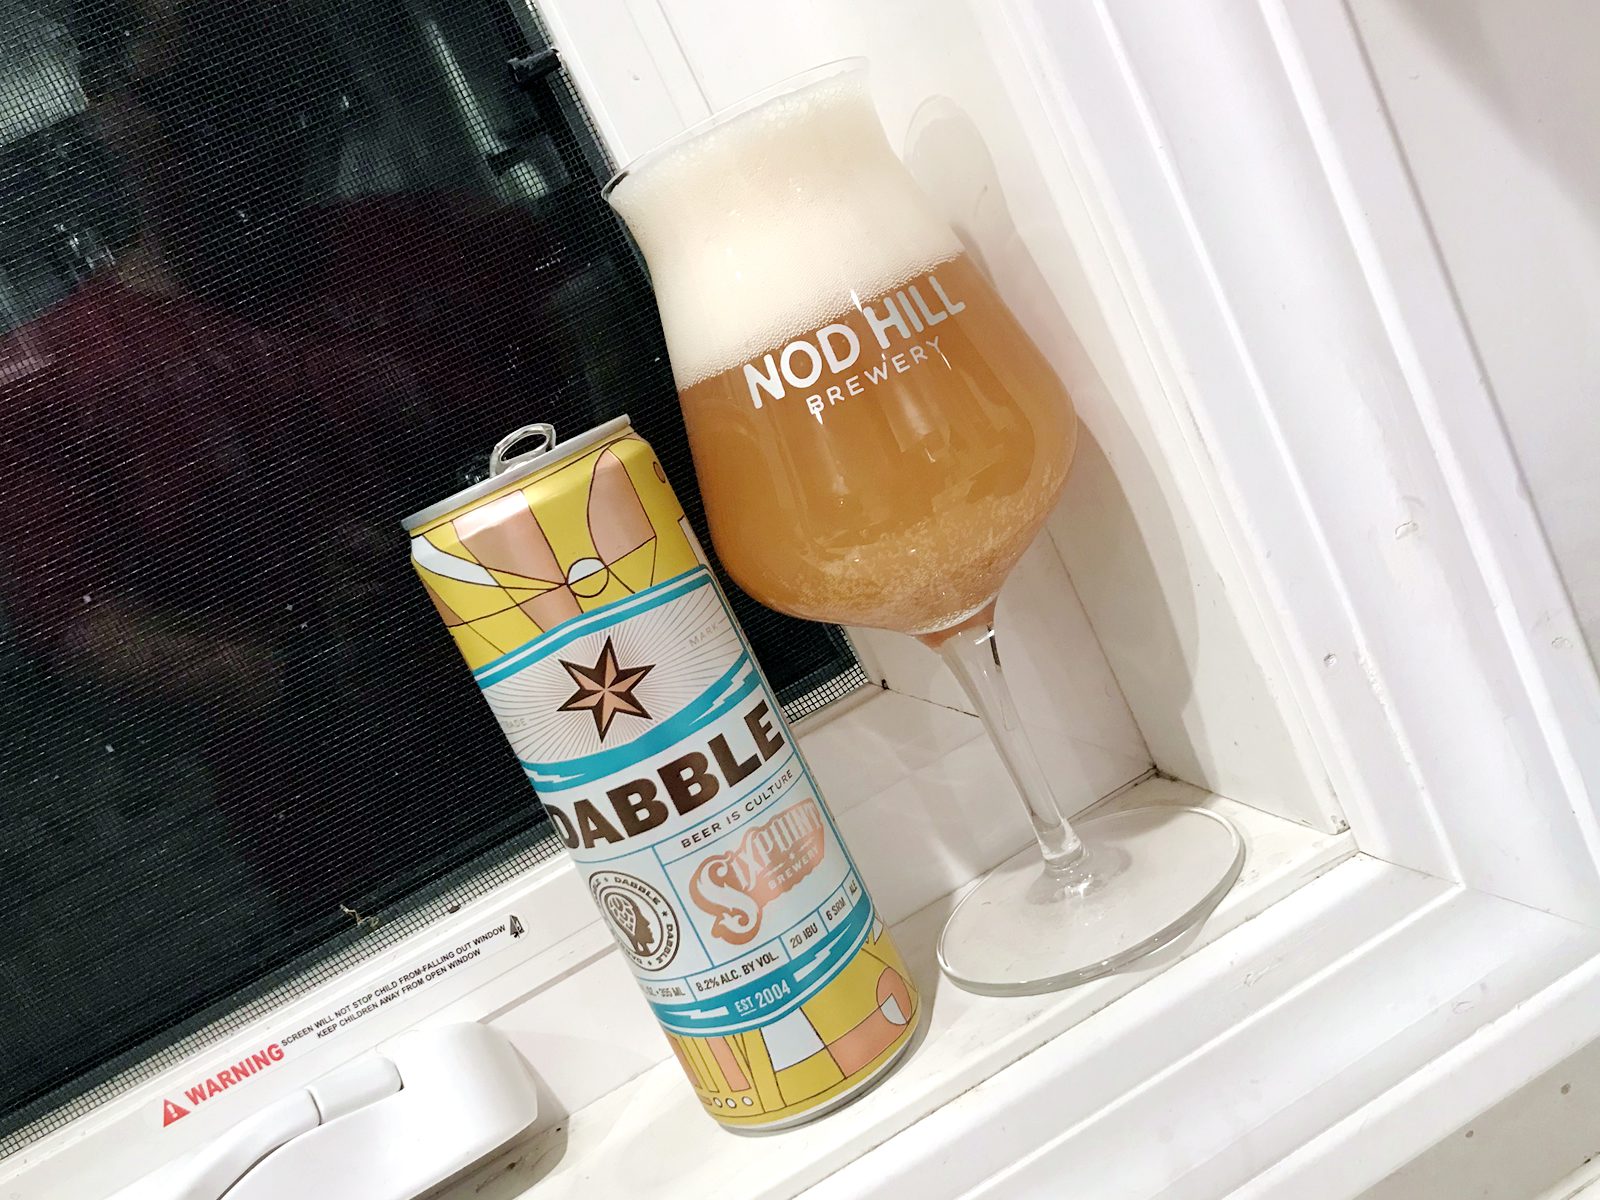 Sixpoint Brewery: Dabble